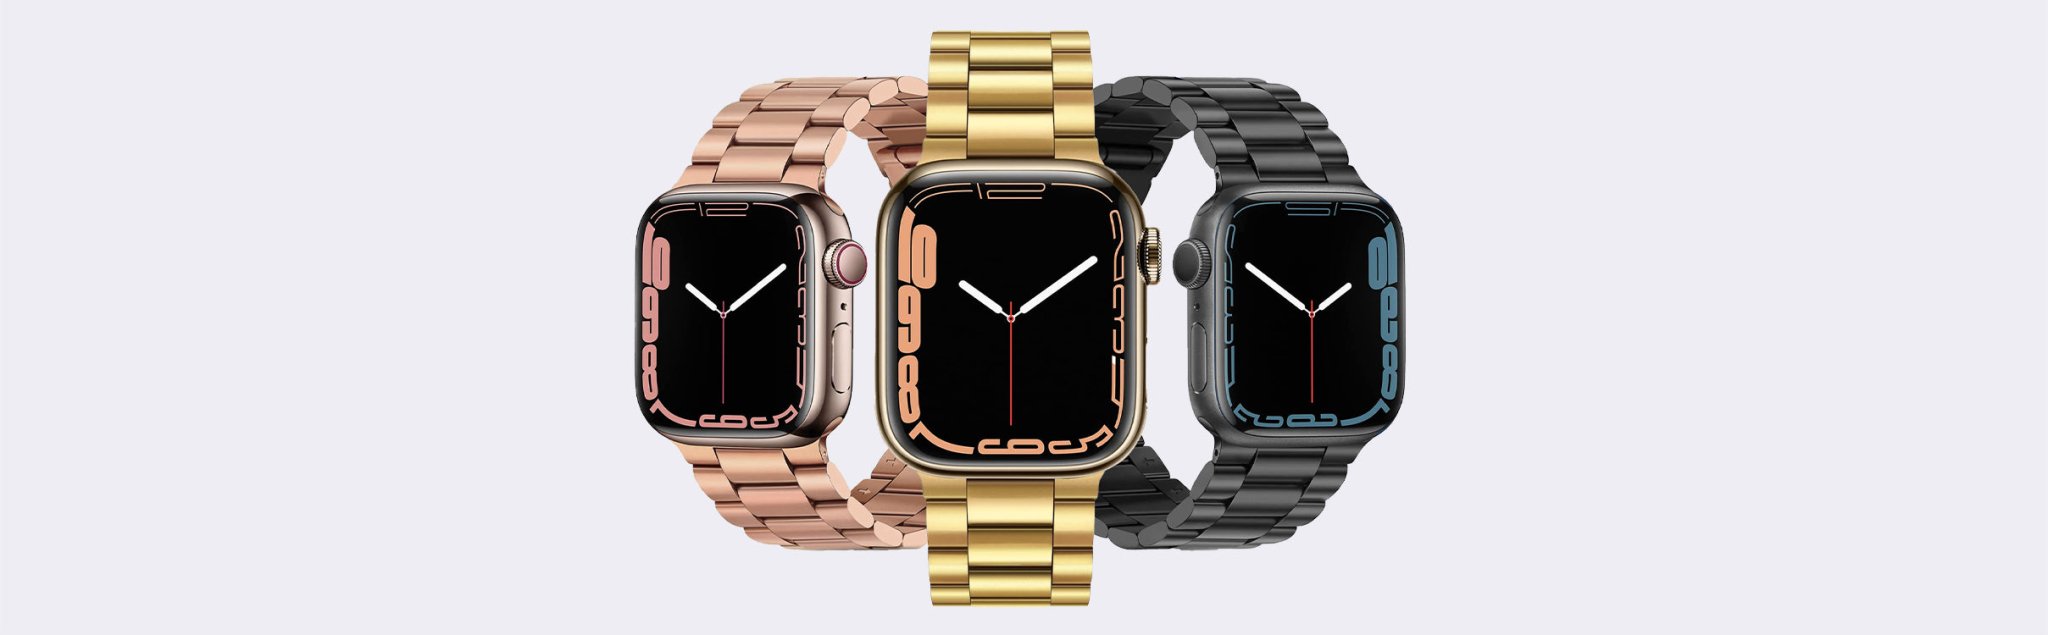 Stainless Steel Straps For Apple Watch - Accessories Gifts UK